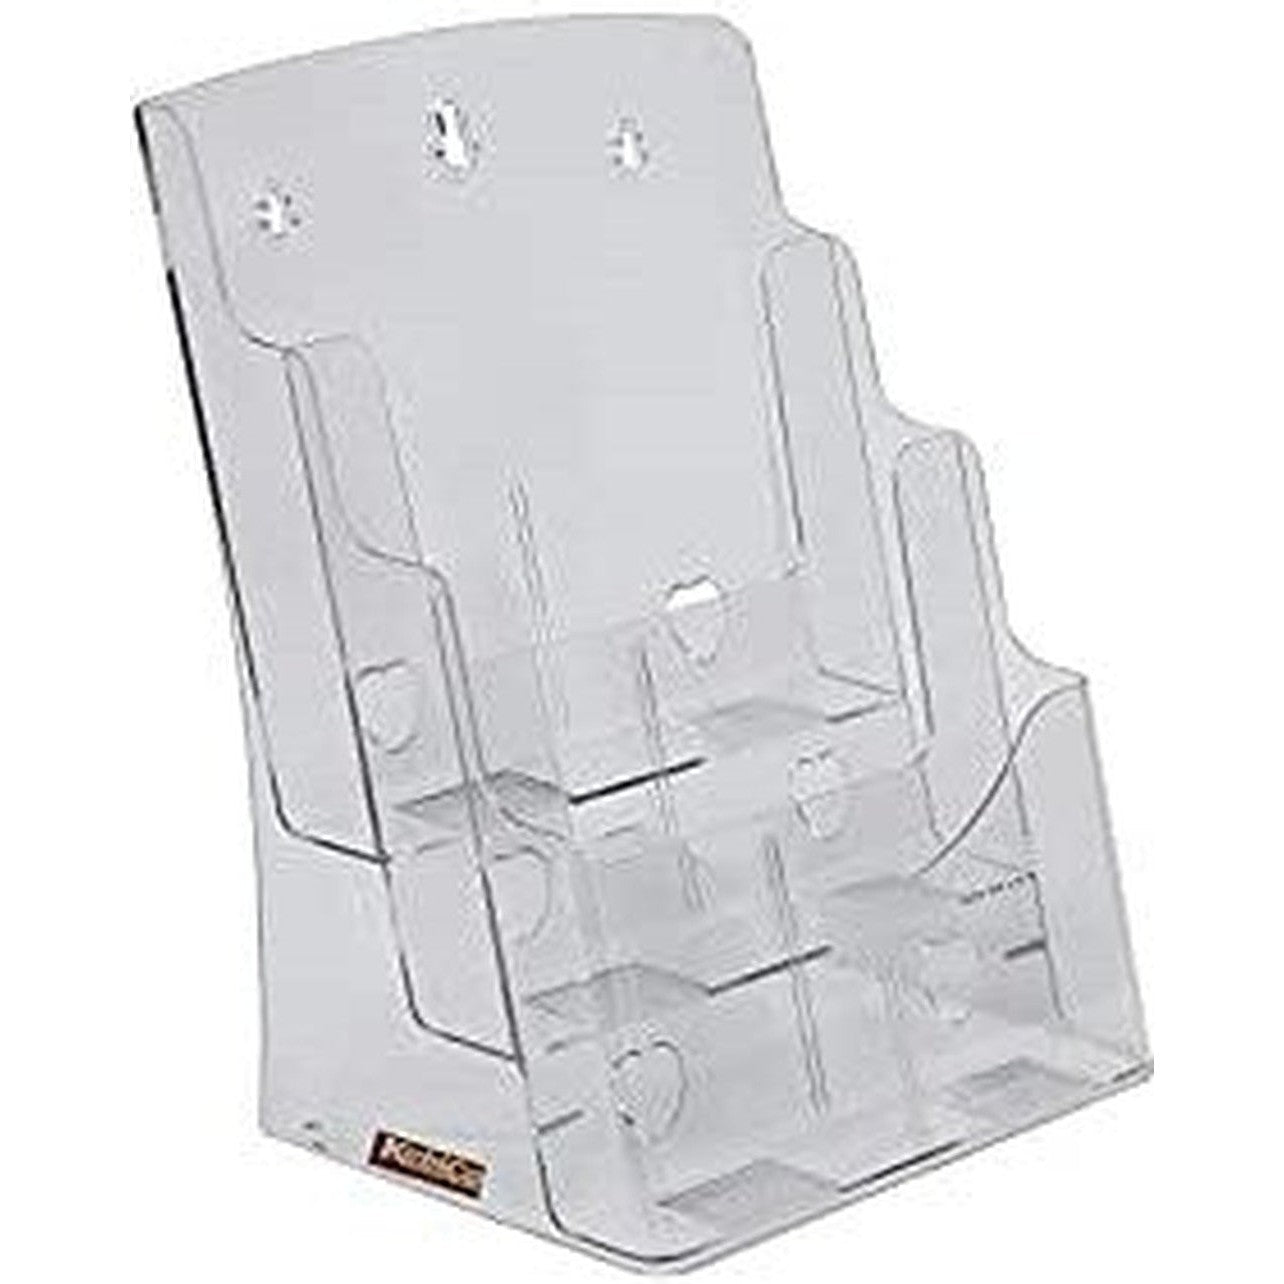 Acrylic 3 Compartments Stand A4 Size-Display Stands-Other-Star Light Kuwait